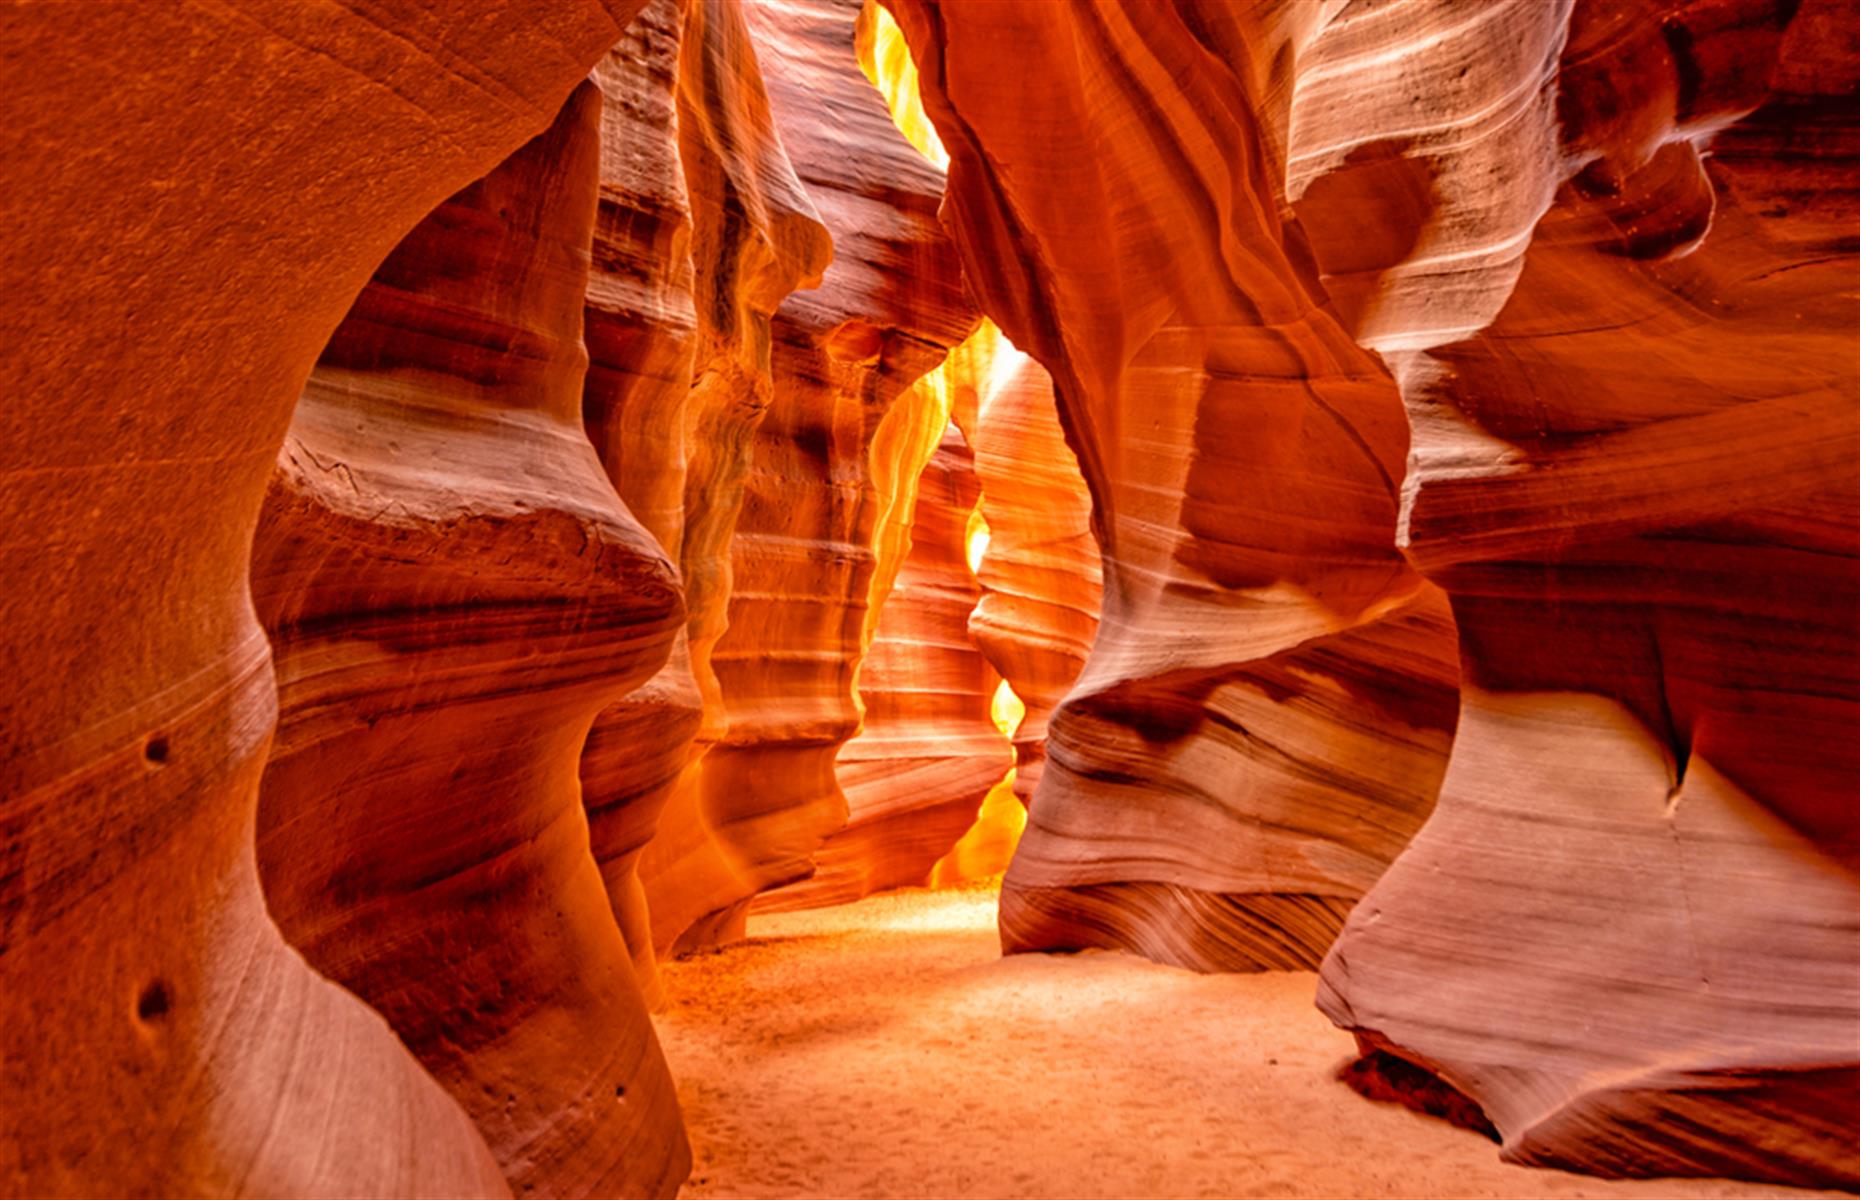 <p>Antelope Canyon in the Navajo Nation is the work of hundreds of years of sandstone erosion. There are two canyons to explore (Upper and Lower) and they're accessible by <a href="https://discovernavajo.com/discover-the-navajo-nation/parks/antelope-canyon/">guided tour only</a>. Go early to get the best photos and book your tour in advance – while the COVID-19 pandemic rumbles on, tours are running at 50% capacity.</p>